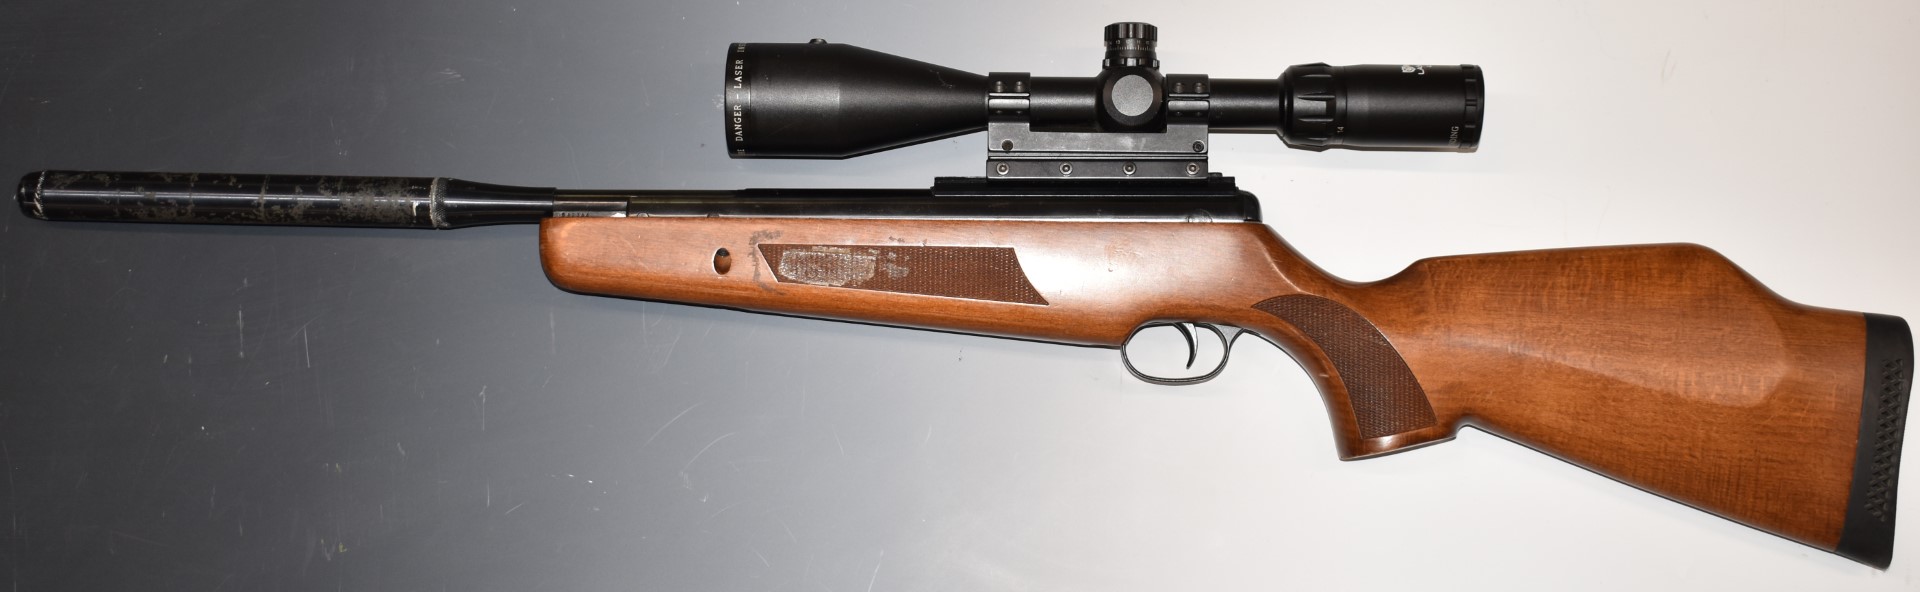 BSA .22 air rifle with chequered semi-pistol grip and forend, raised cheek piece, sound moderator - Image 6 of 10